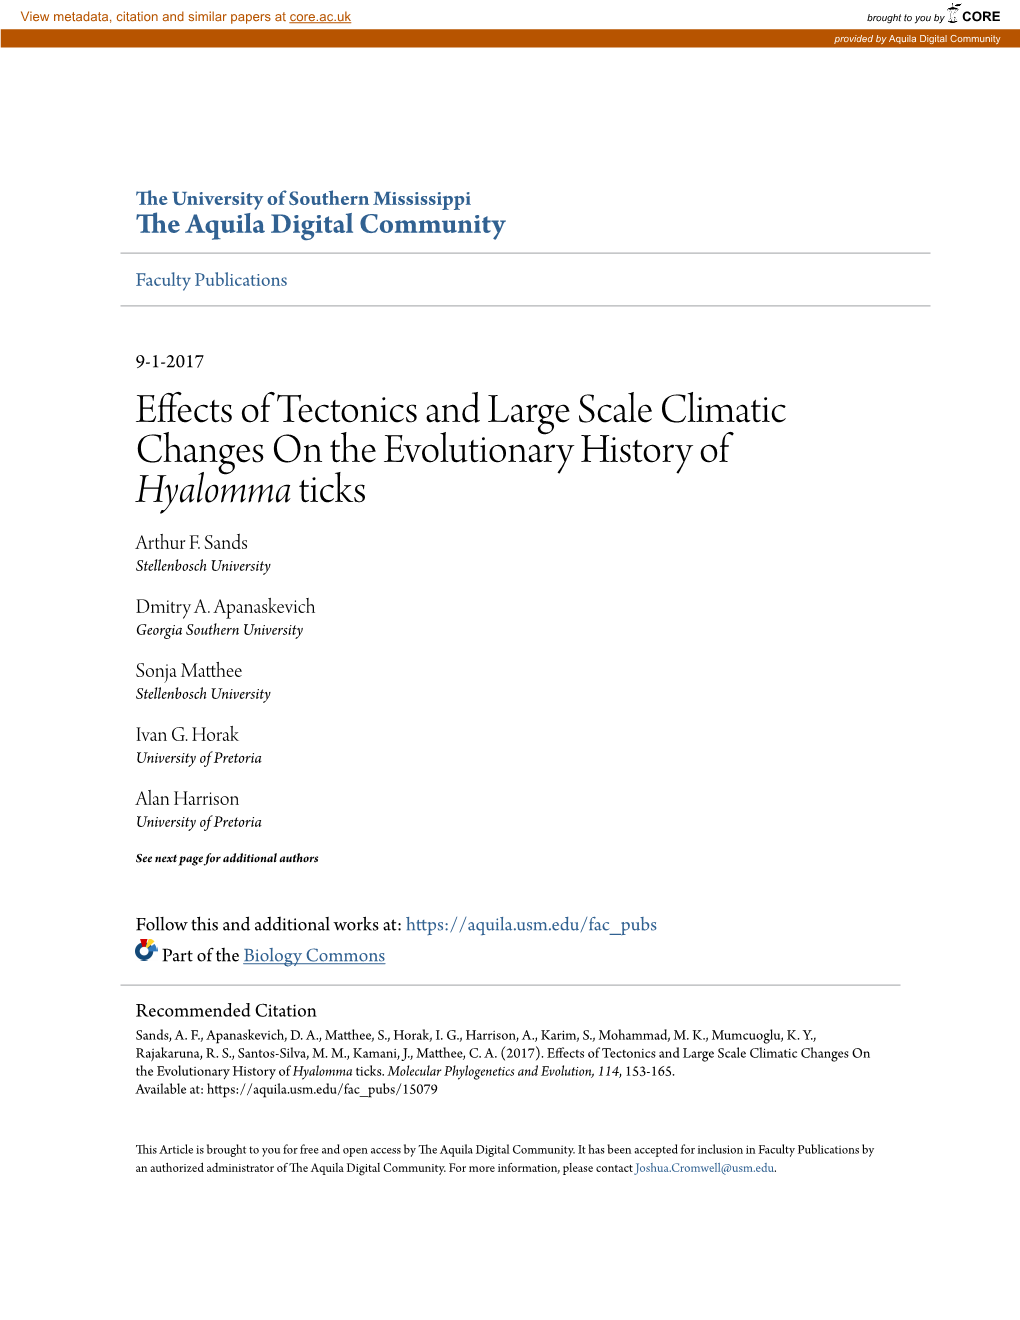 Effects of Tectonics and Large Scale Climatic Changes on the Evolutionary History of Hyalomma Ticks Arthur F